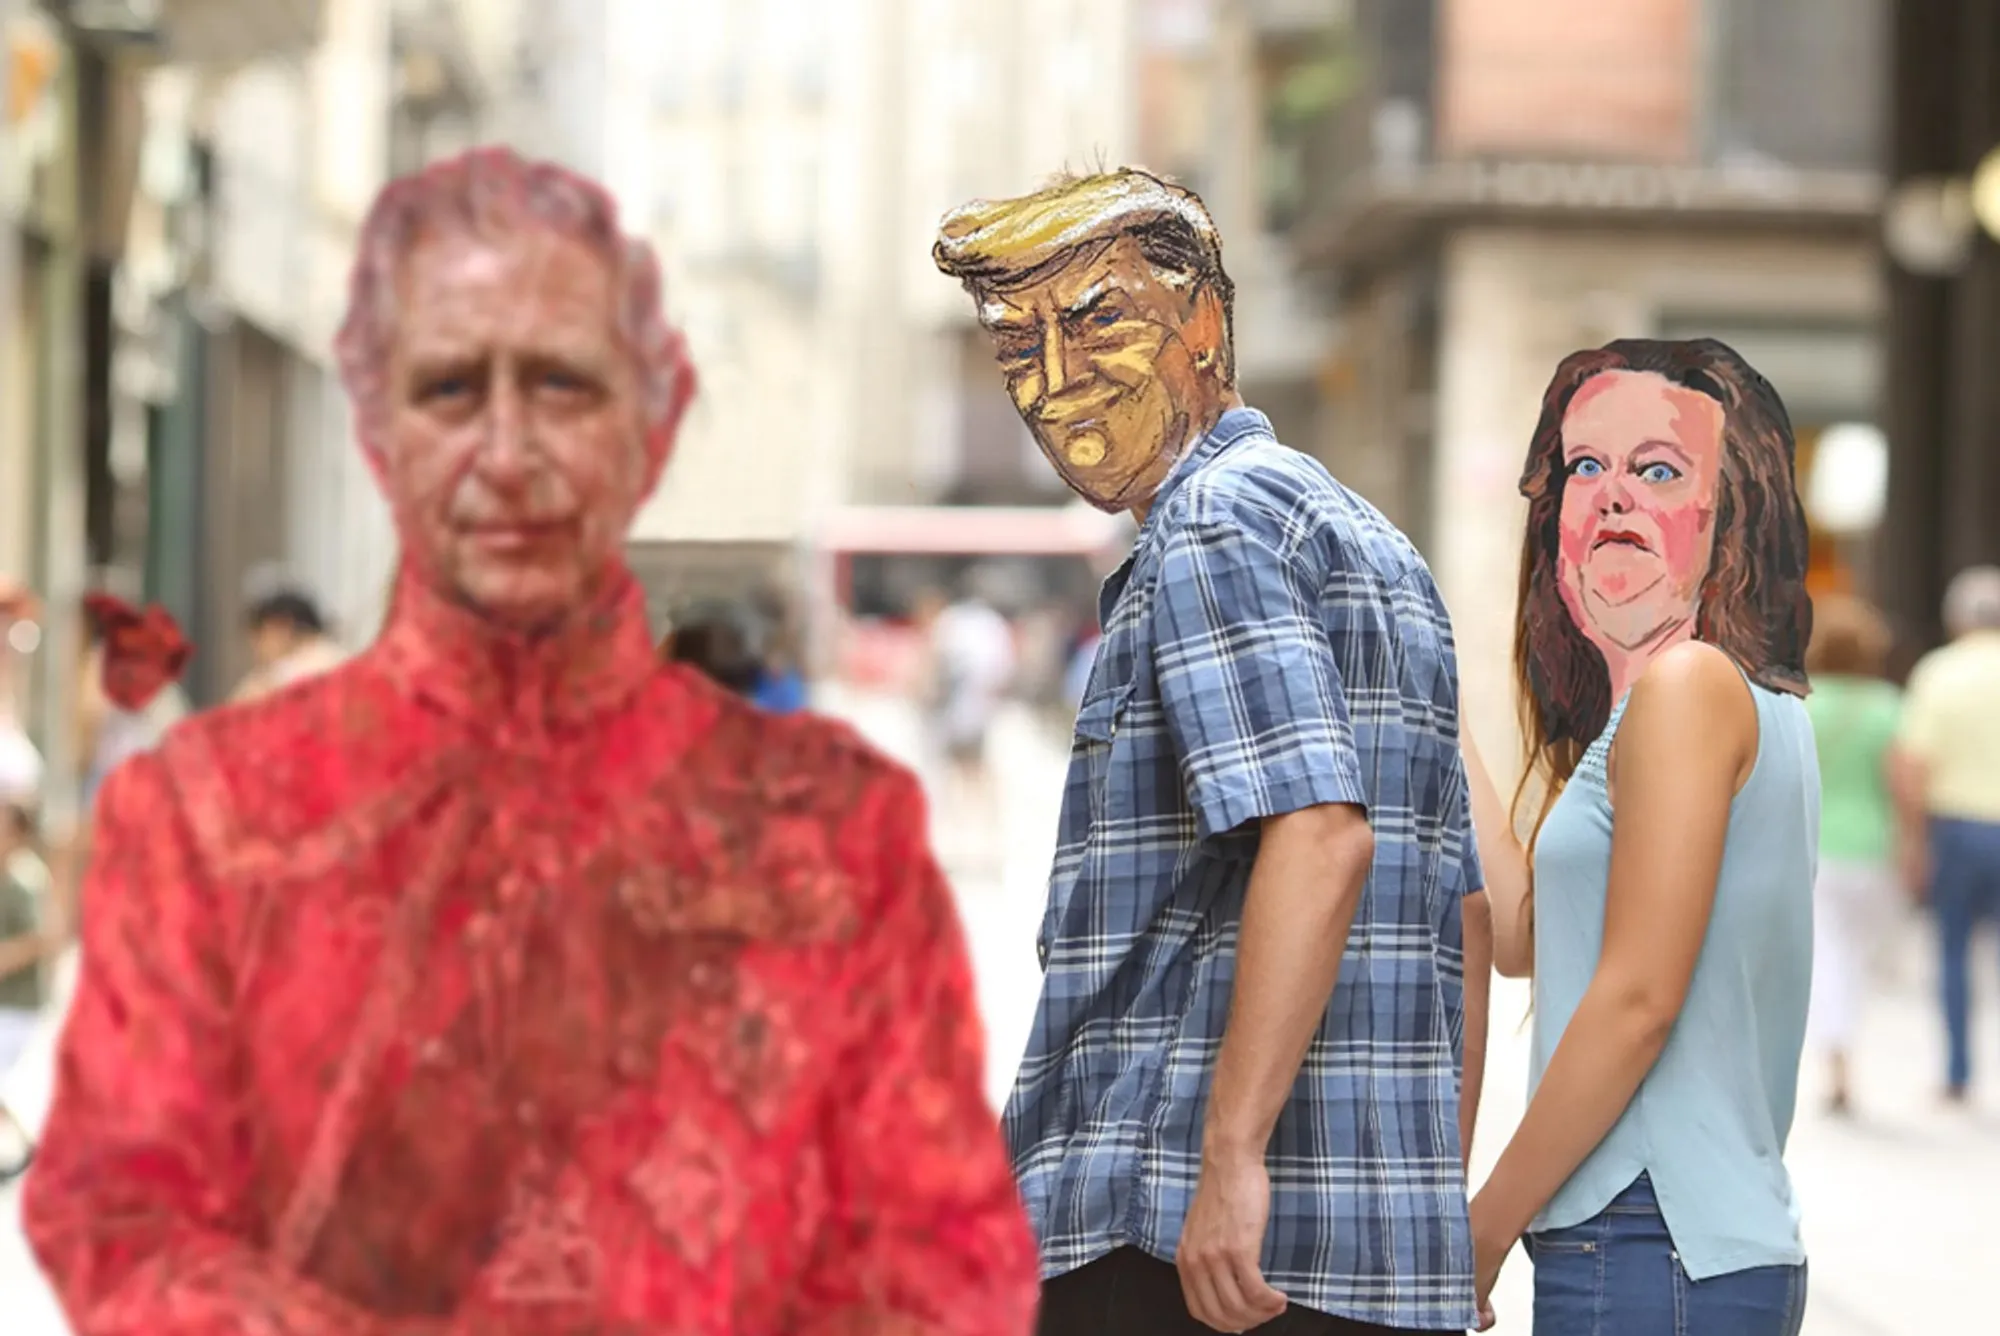 meme template of mad at guy looking at another girl, but faces swapped for portraits of Trump, the brittish king, and the woman in the linked article